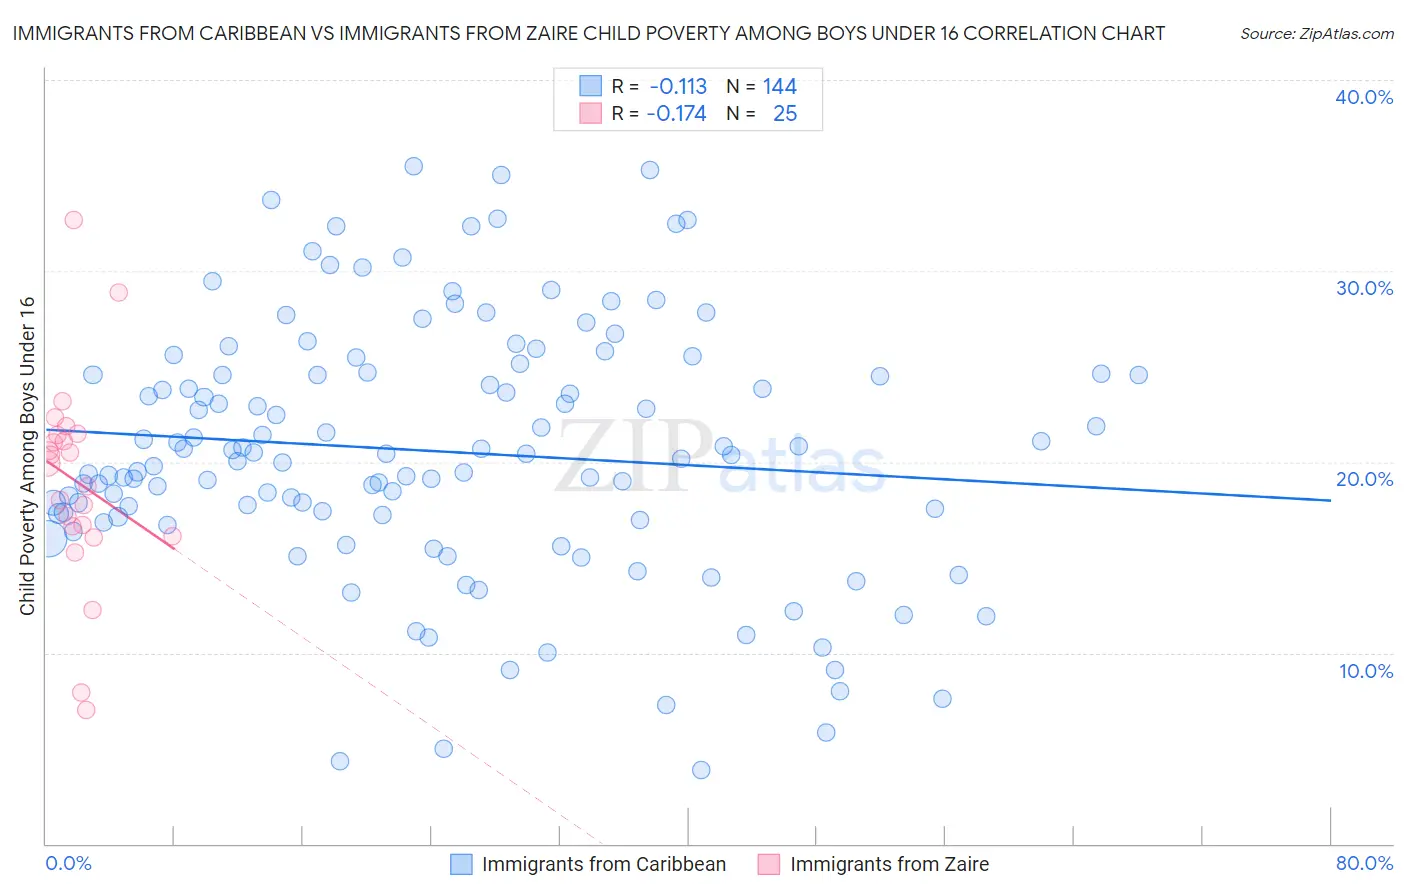 Immigrants from Caribbean vs Immigrants from Zaire Child Poverty Among Boys Under 16